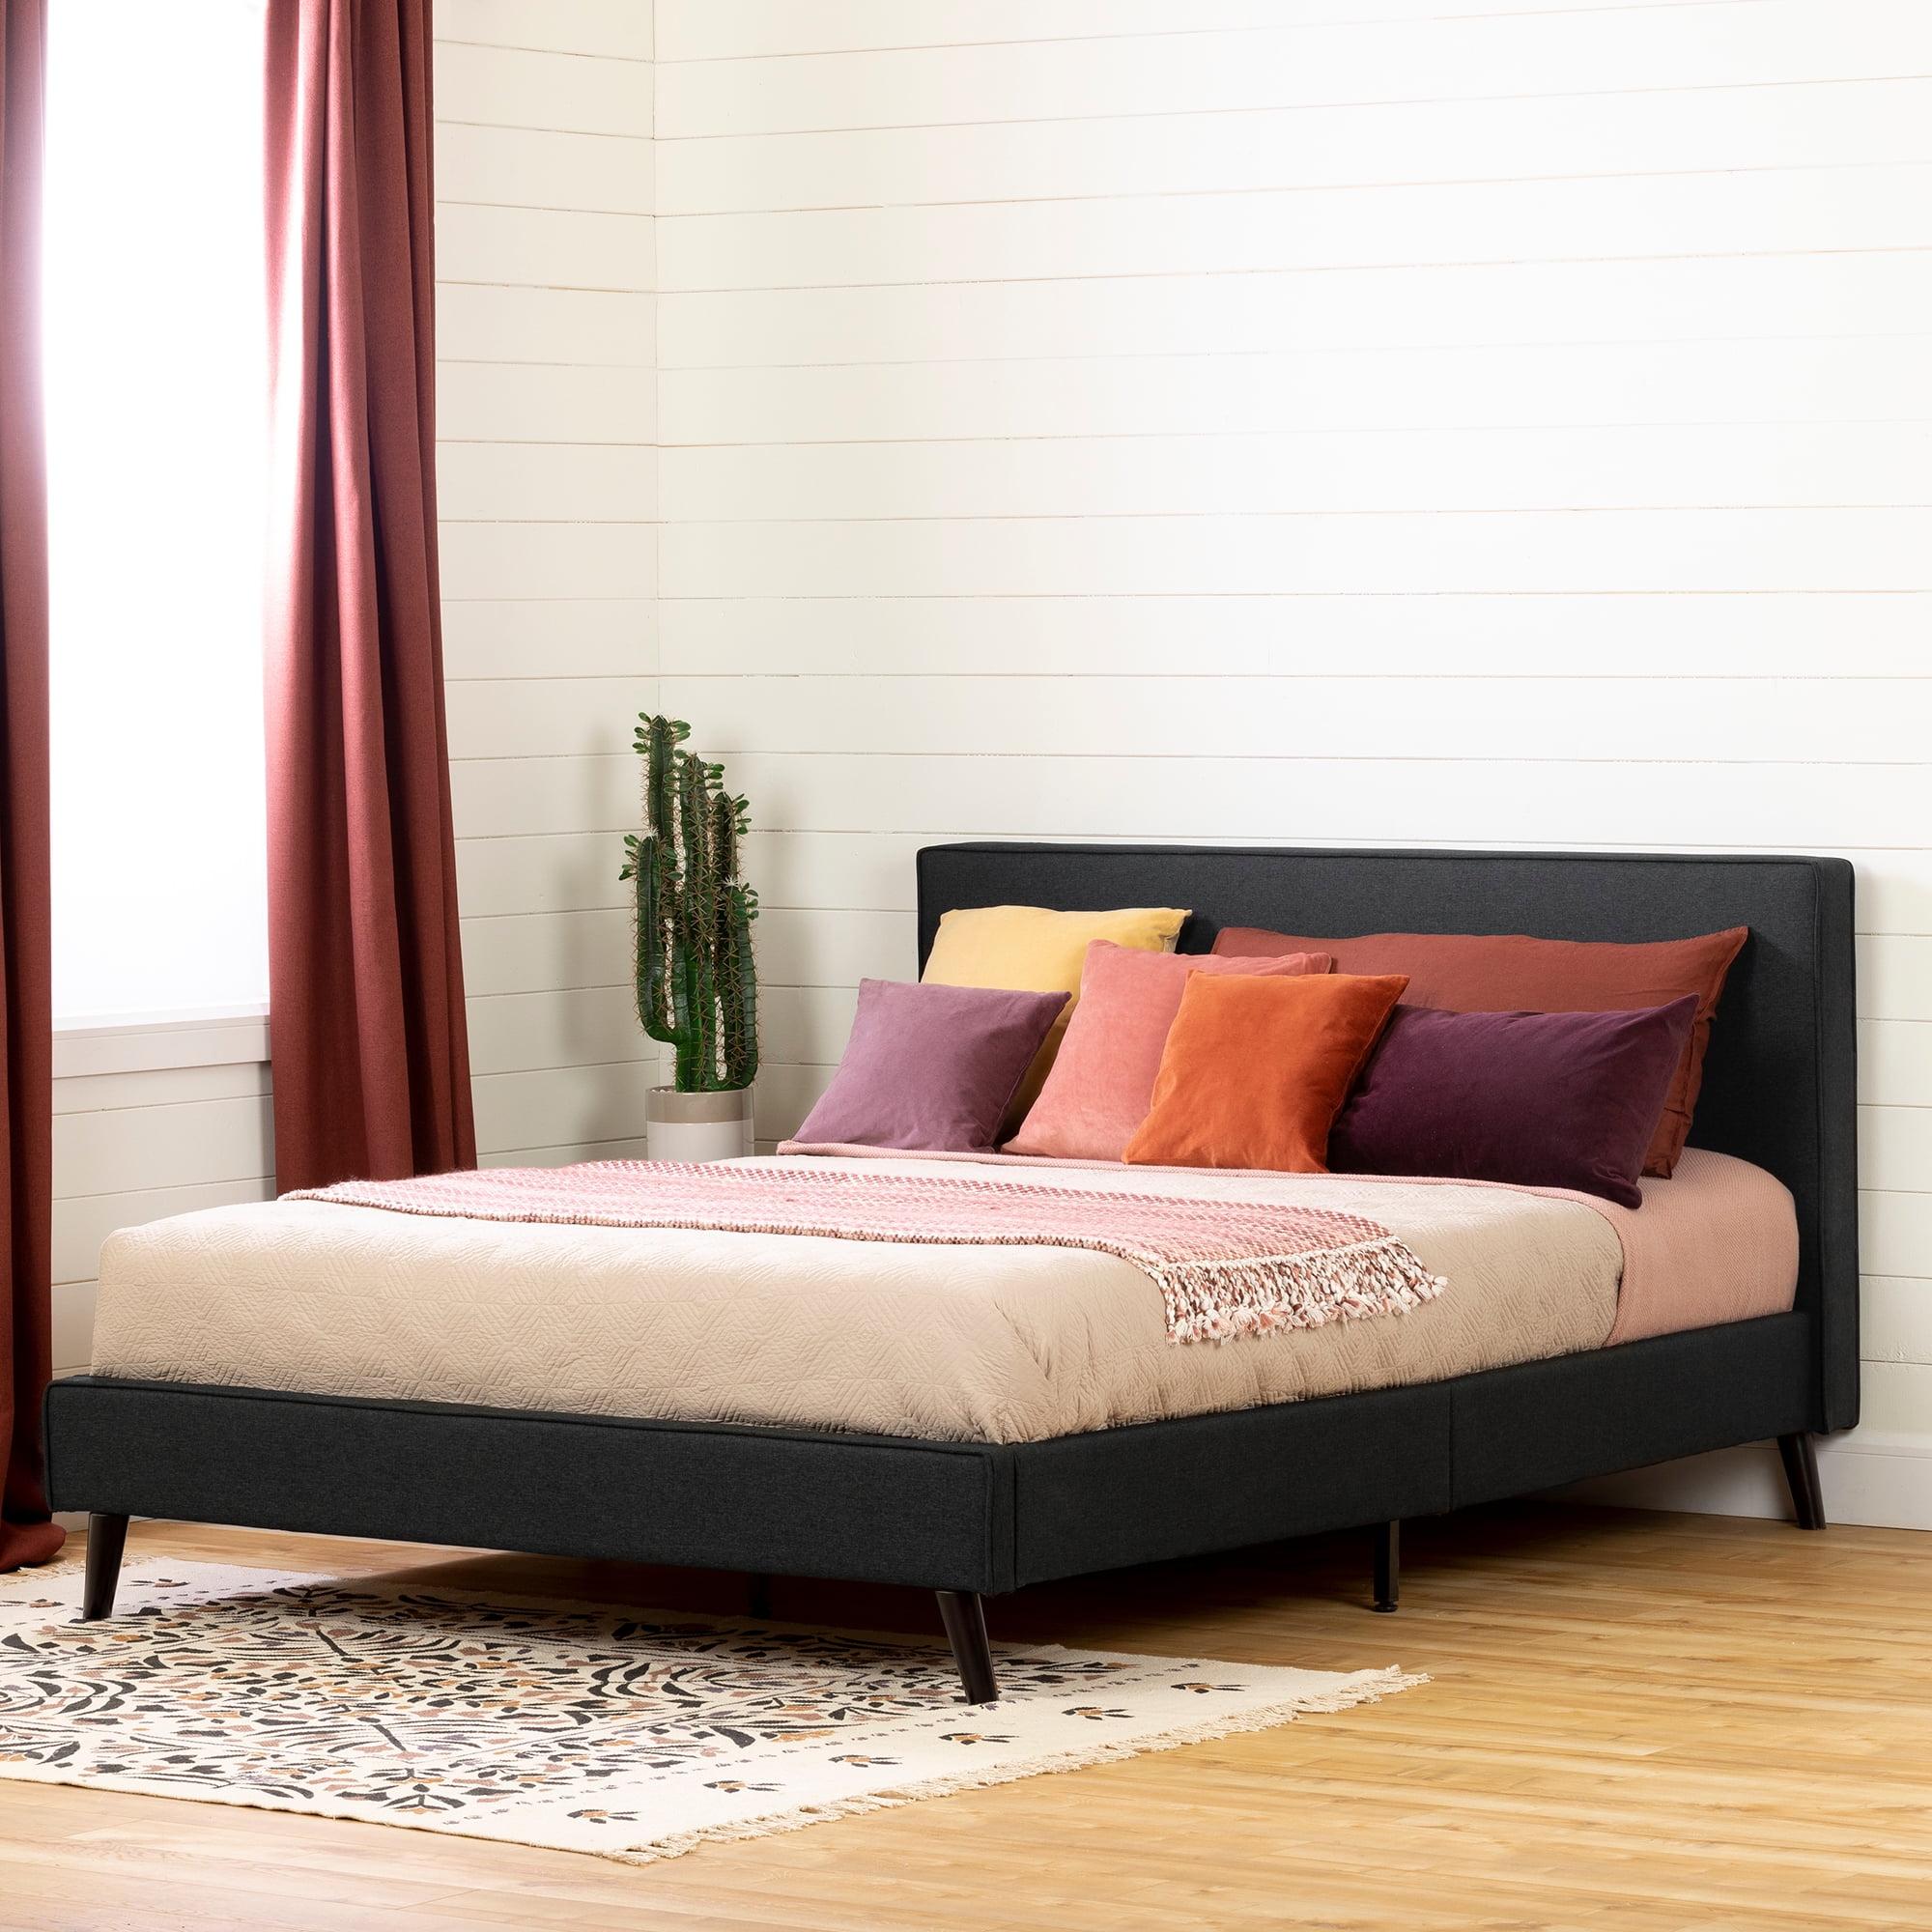 Elegant Matte Charcoal Upholstered Queen Bed with Chic Headboard